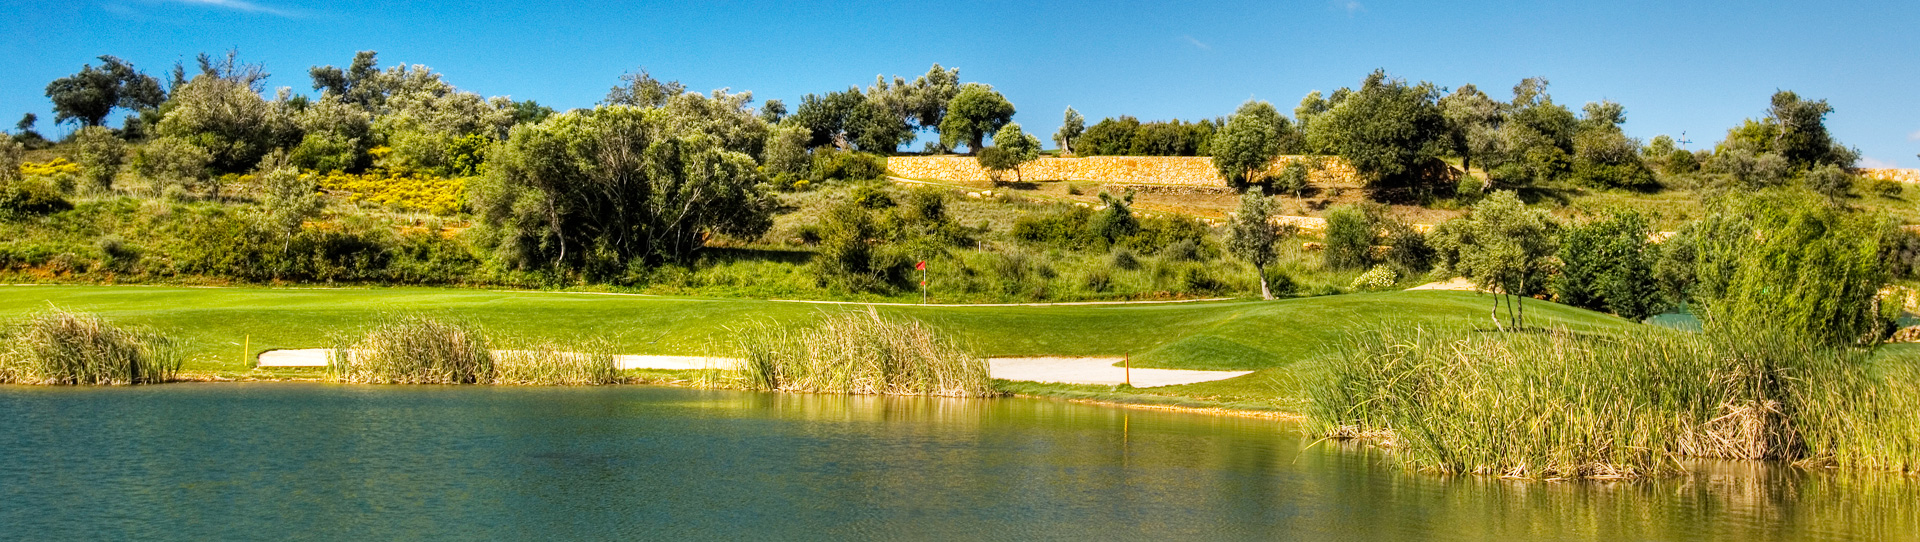 Portugal golf courses - Silves Golf Course - Photo 3